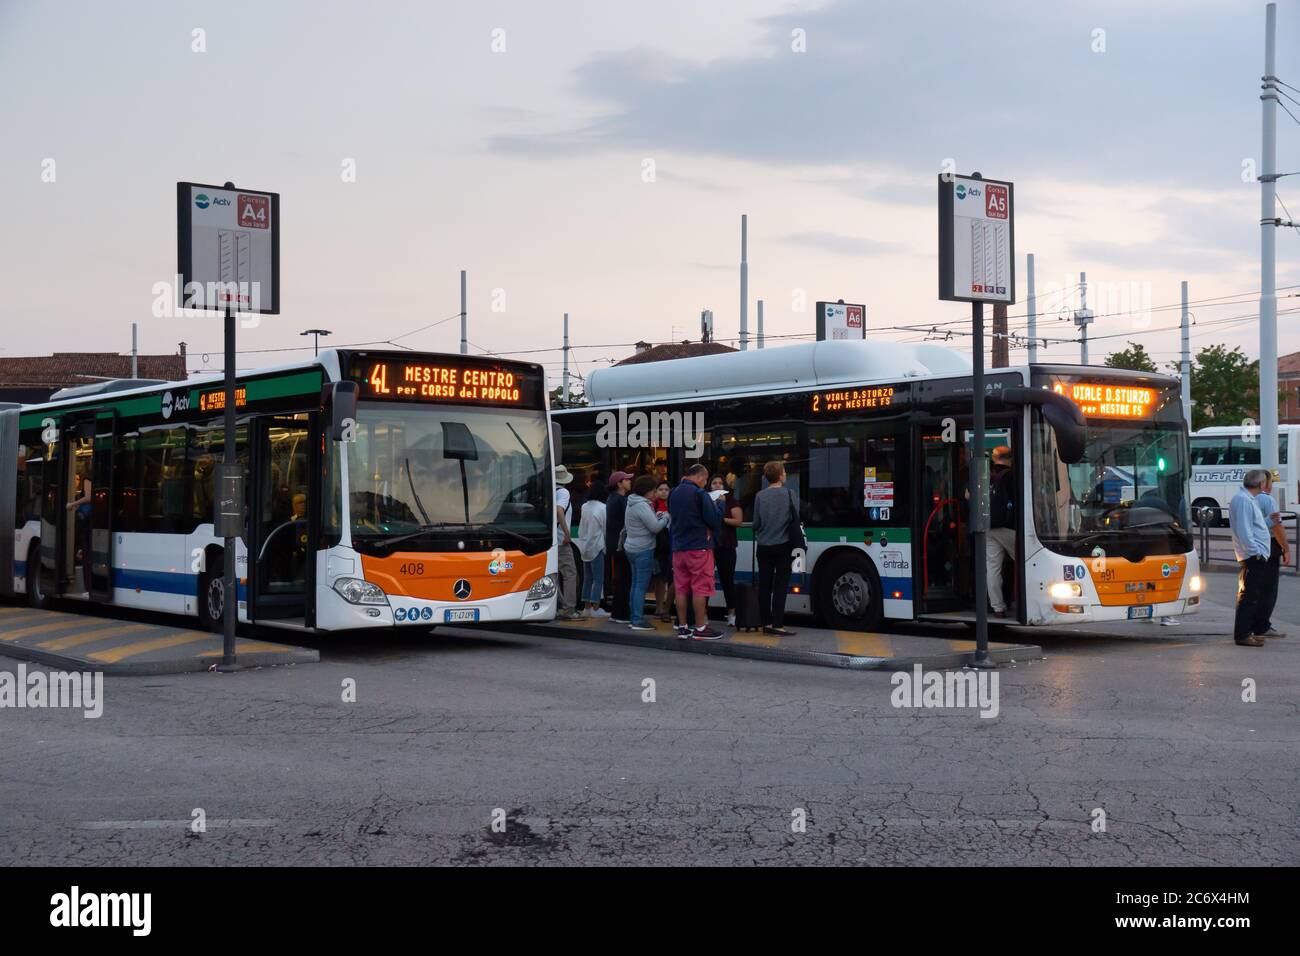 Oct. 1, 2019 - Venice, Italy: Bus station of Venice. Two line buses about to depart. People waiting at the bus stops. Stock Photo